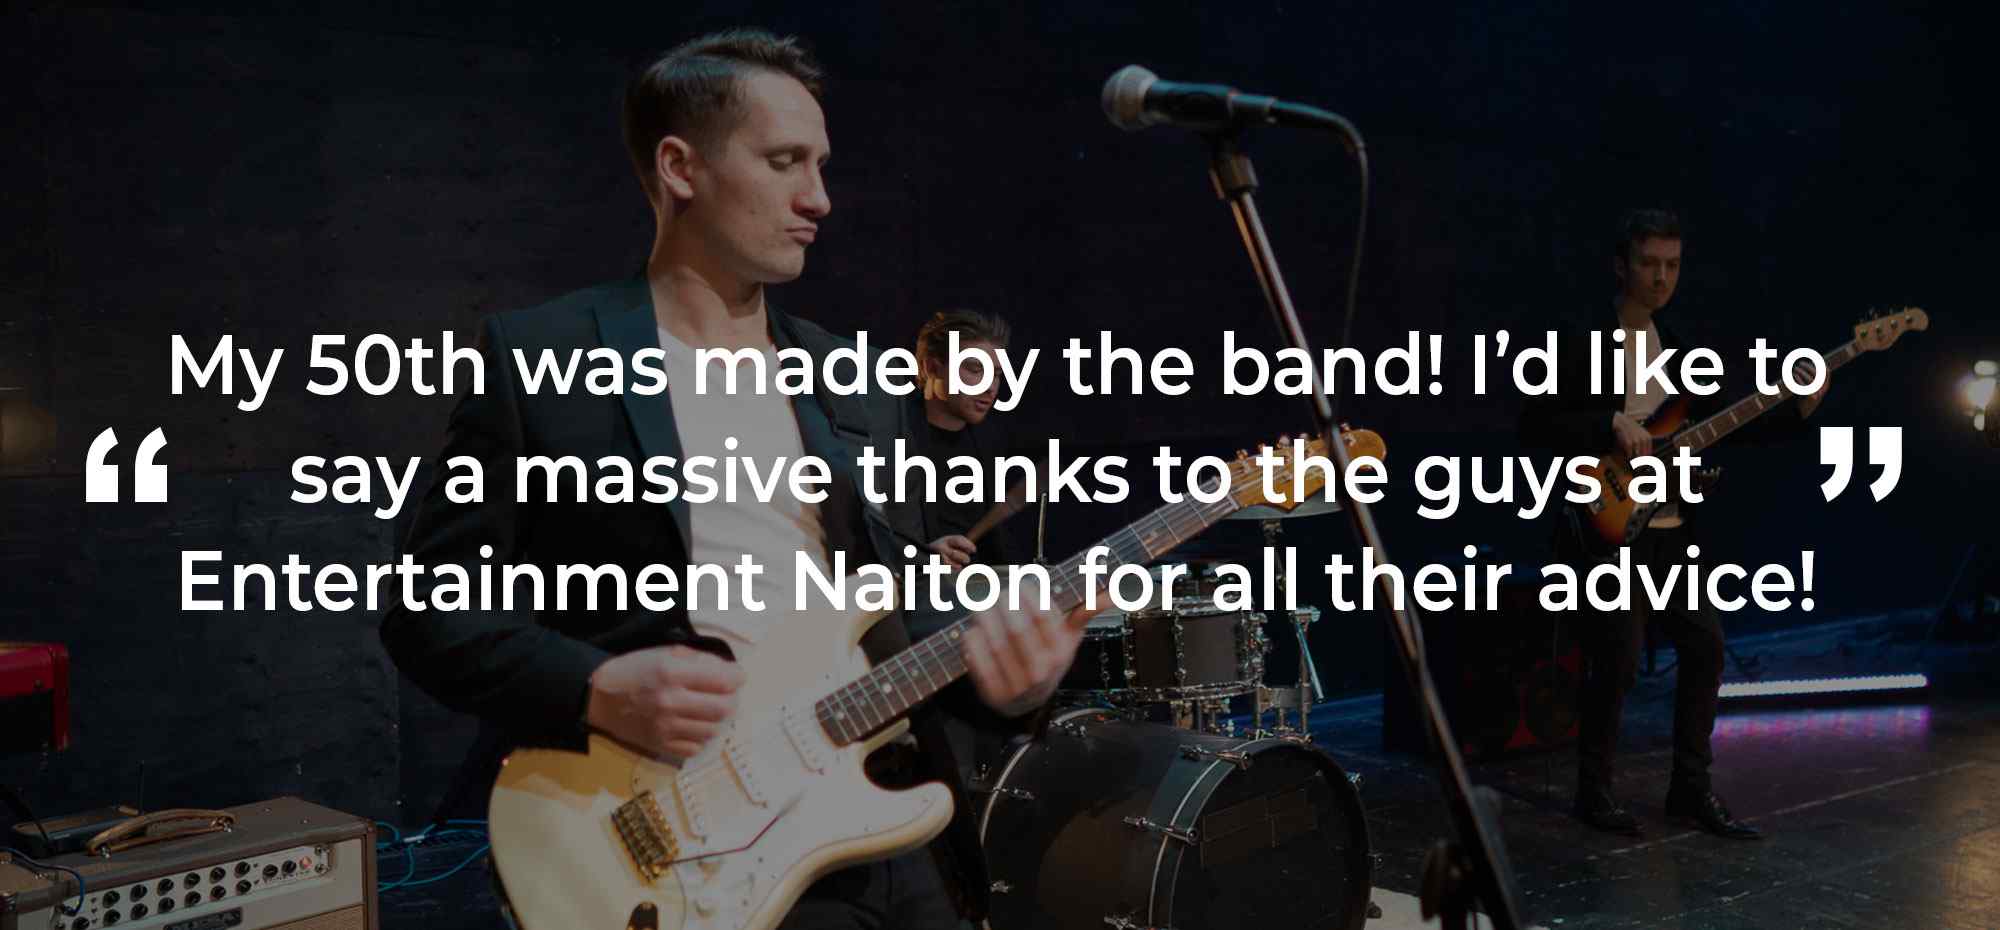 Client Review of a Party Band Tyne And Wear